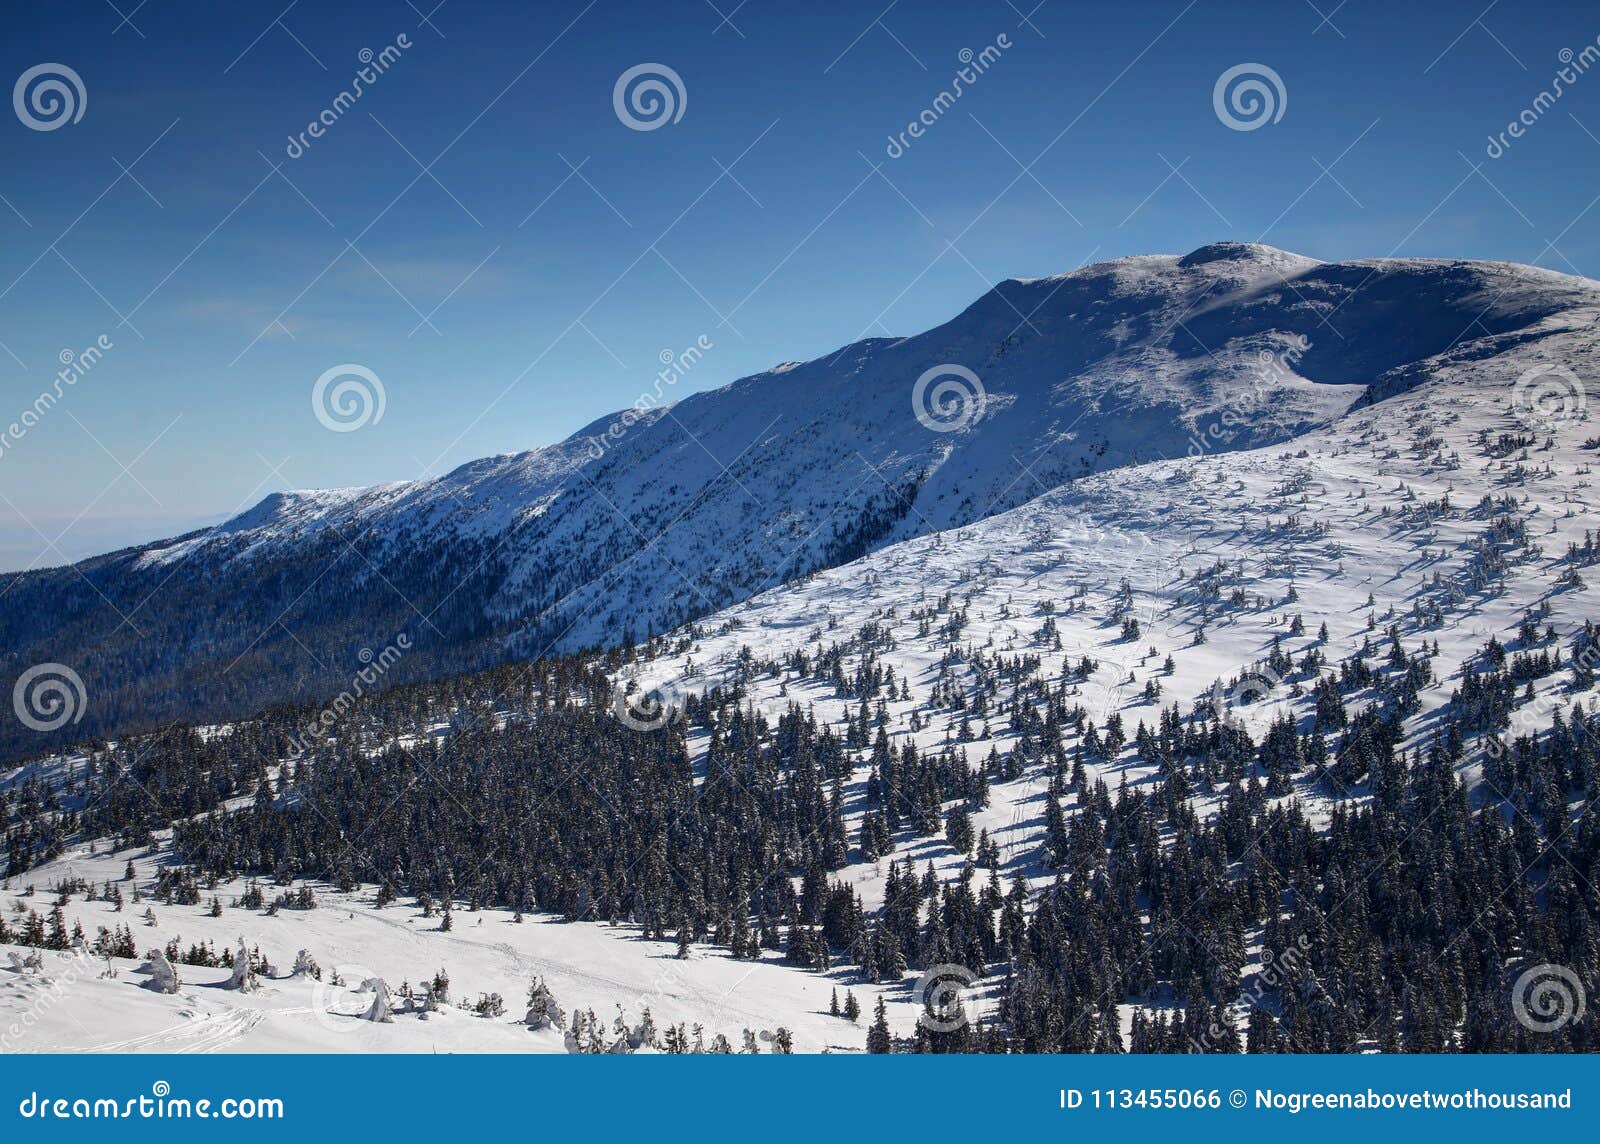 sunny forests and barren snowfields on babia gora peak poland